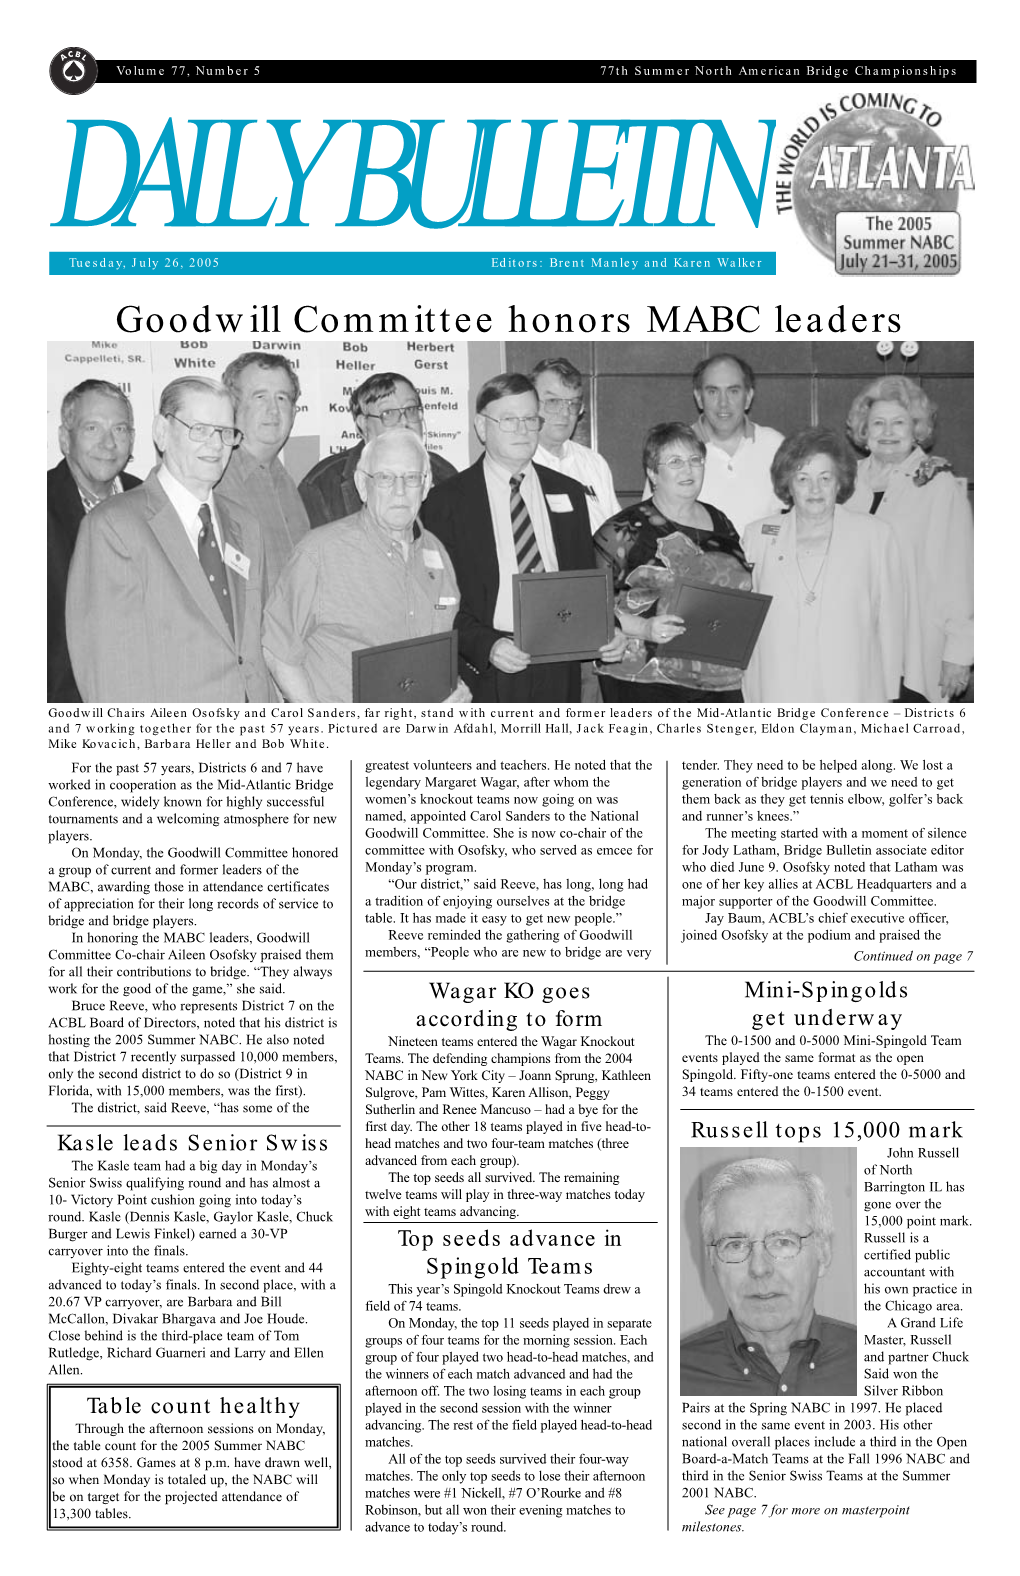 Goodwill Committee Honors MABC Leaders